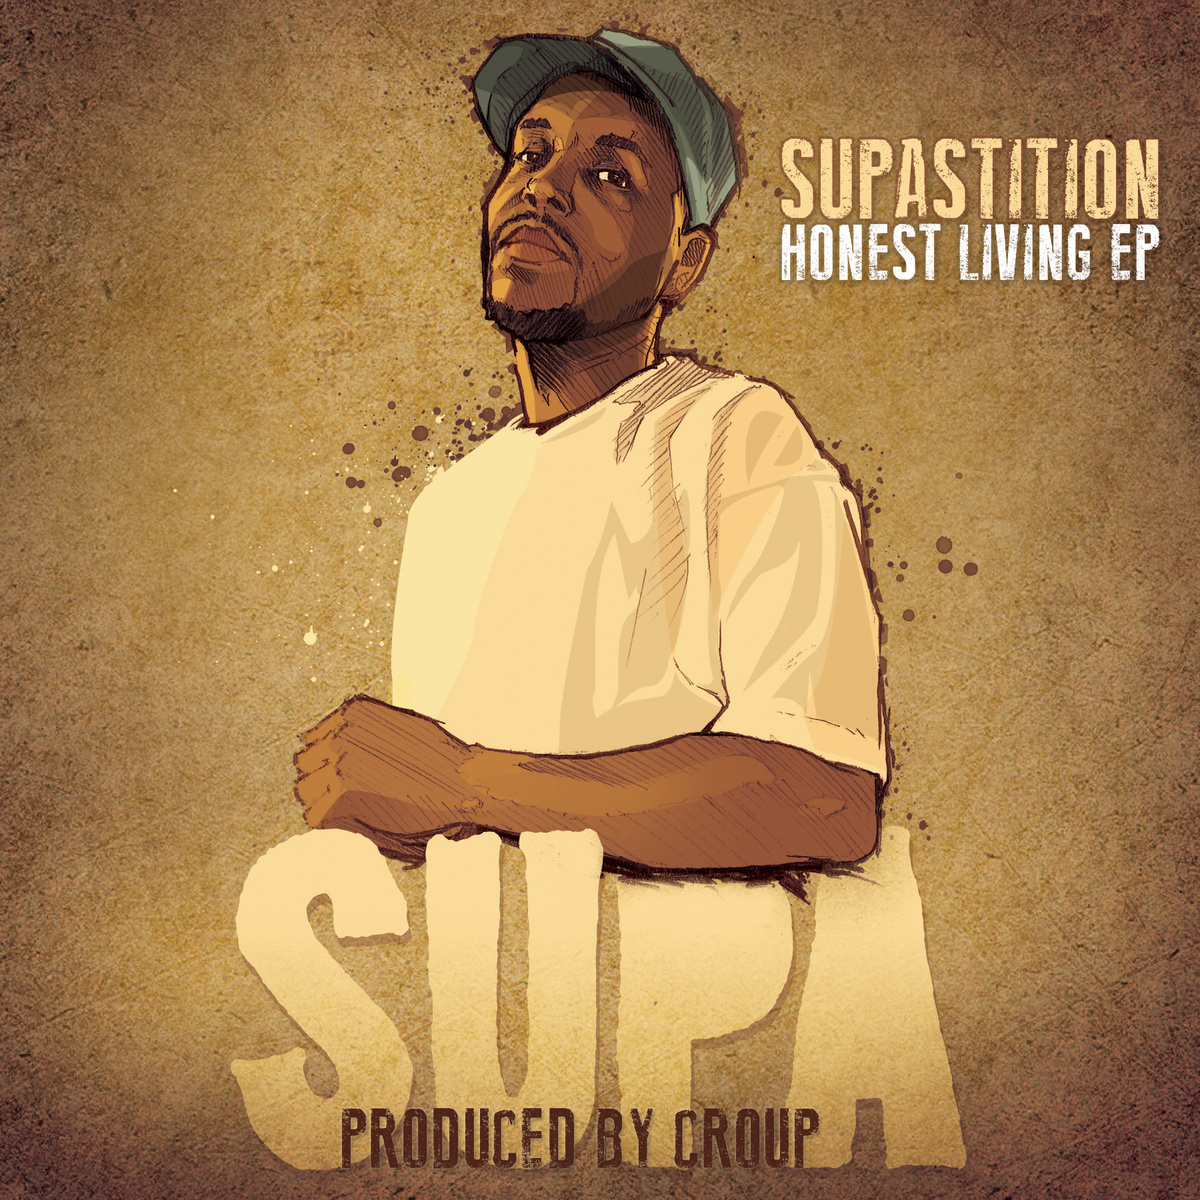 Supastition - "Nothing Like It" (Video)